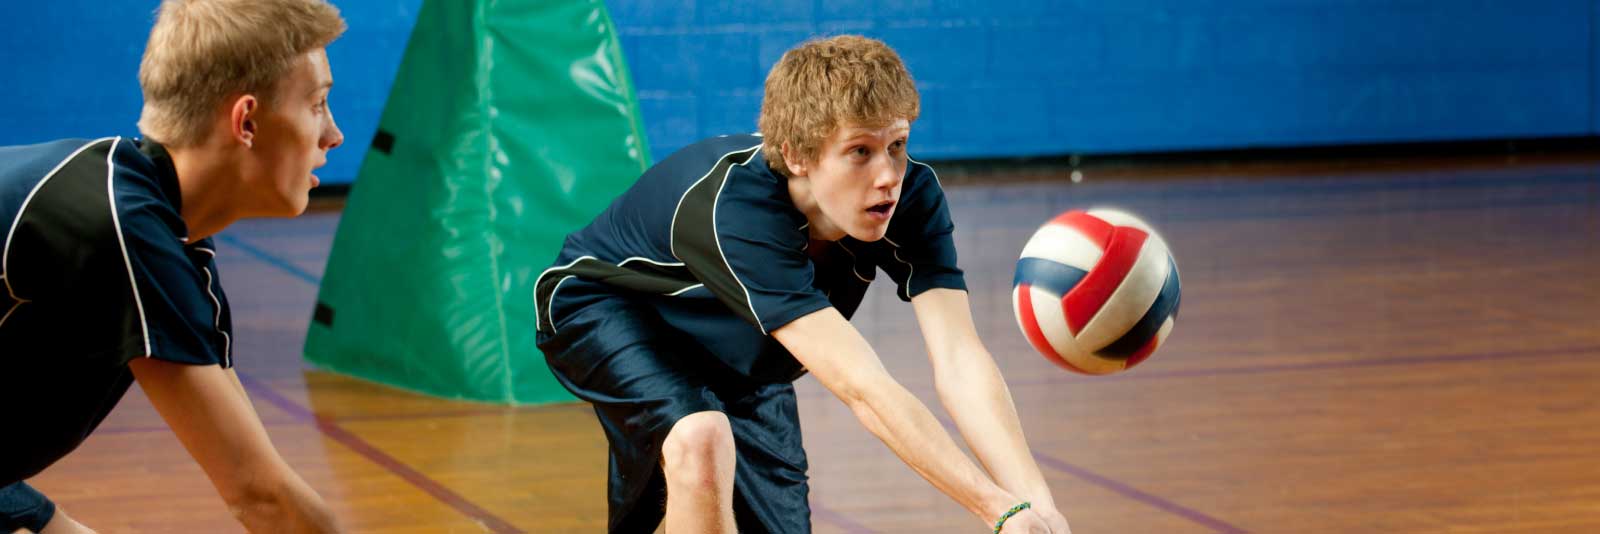 Male athlete playing volleyball